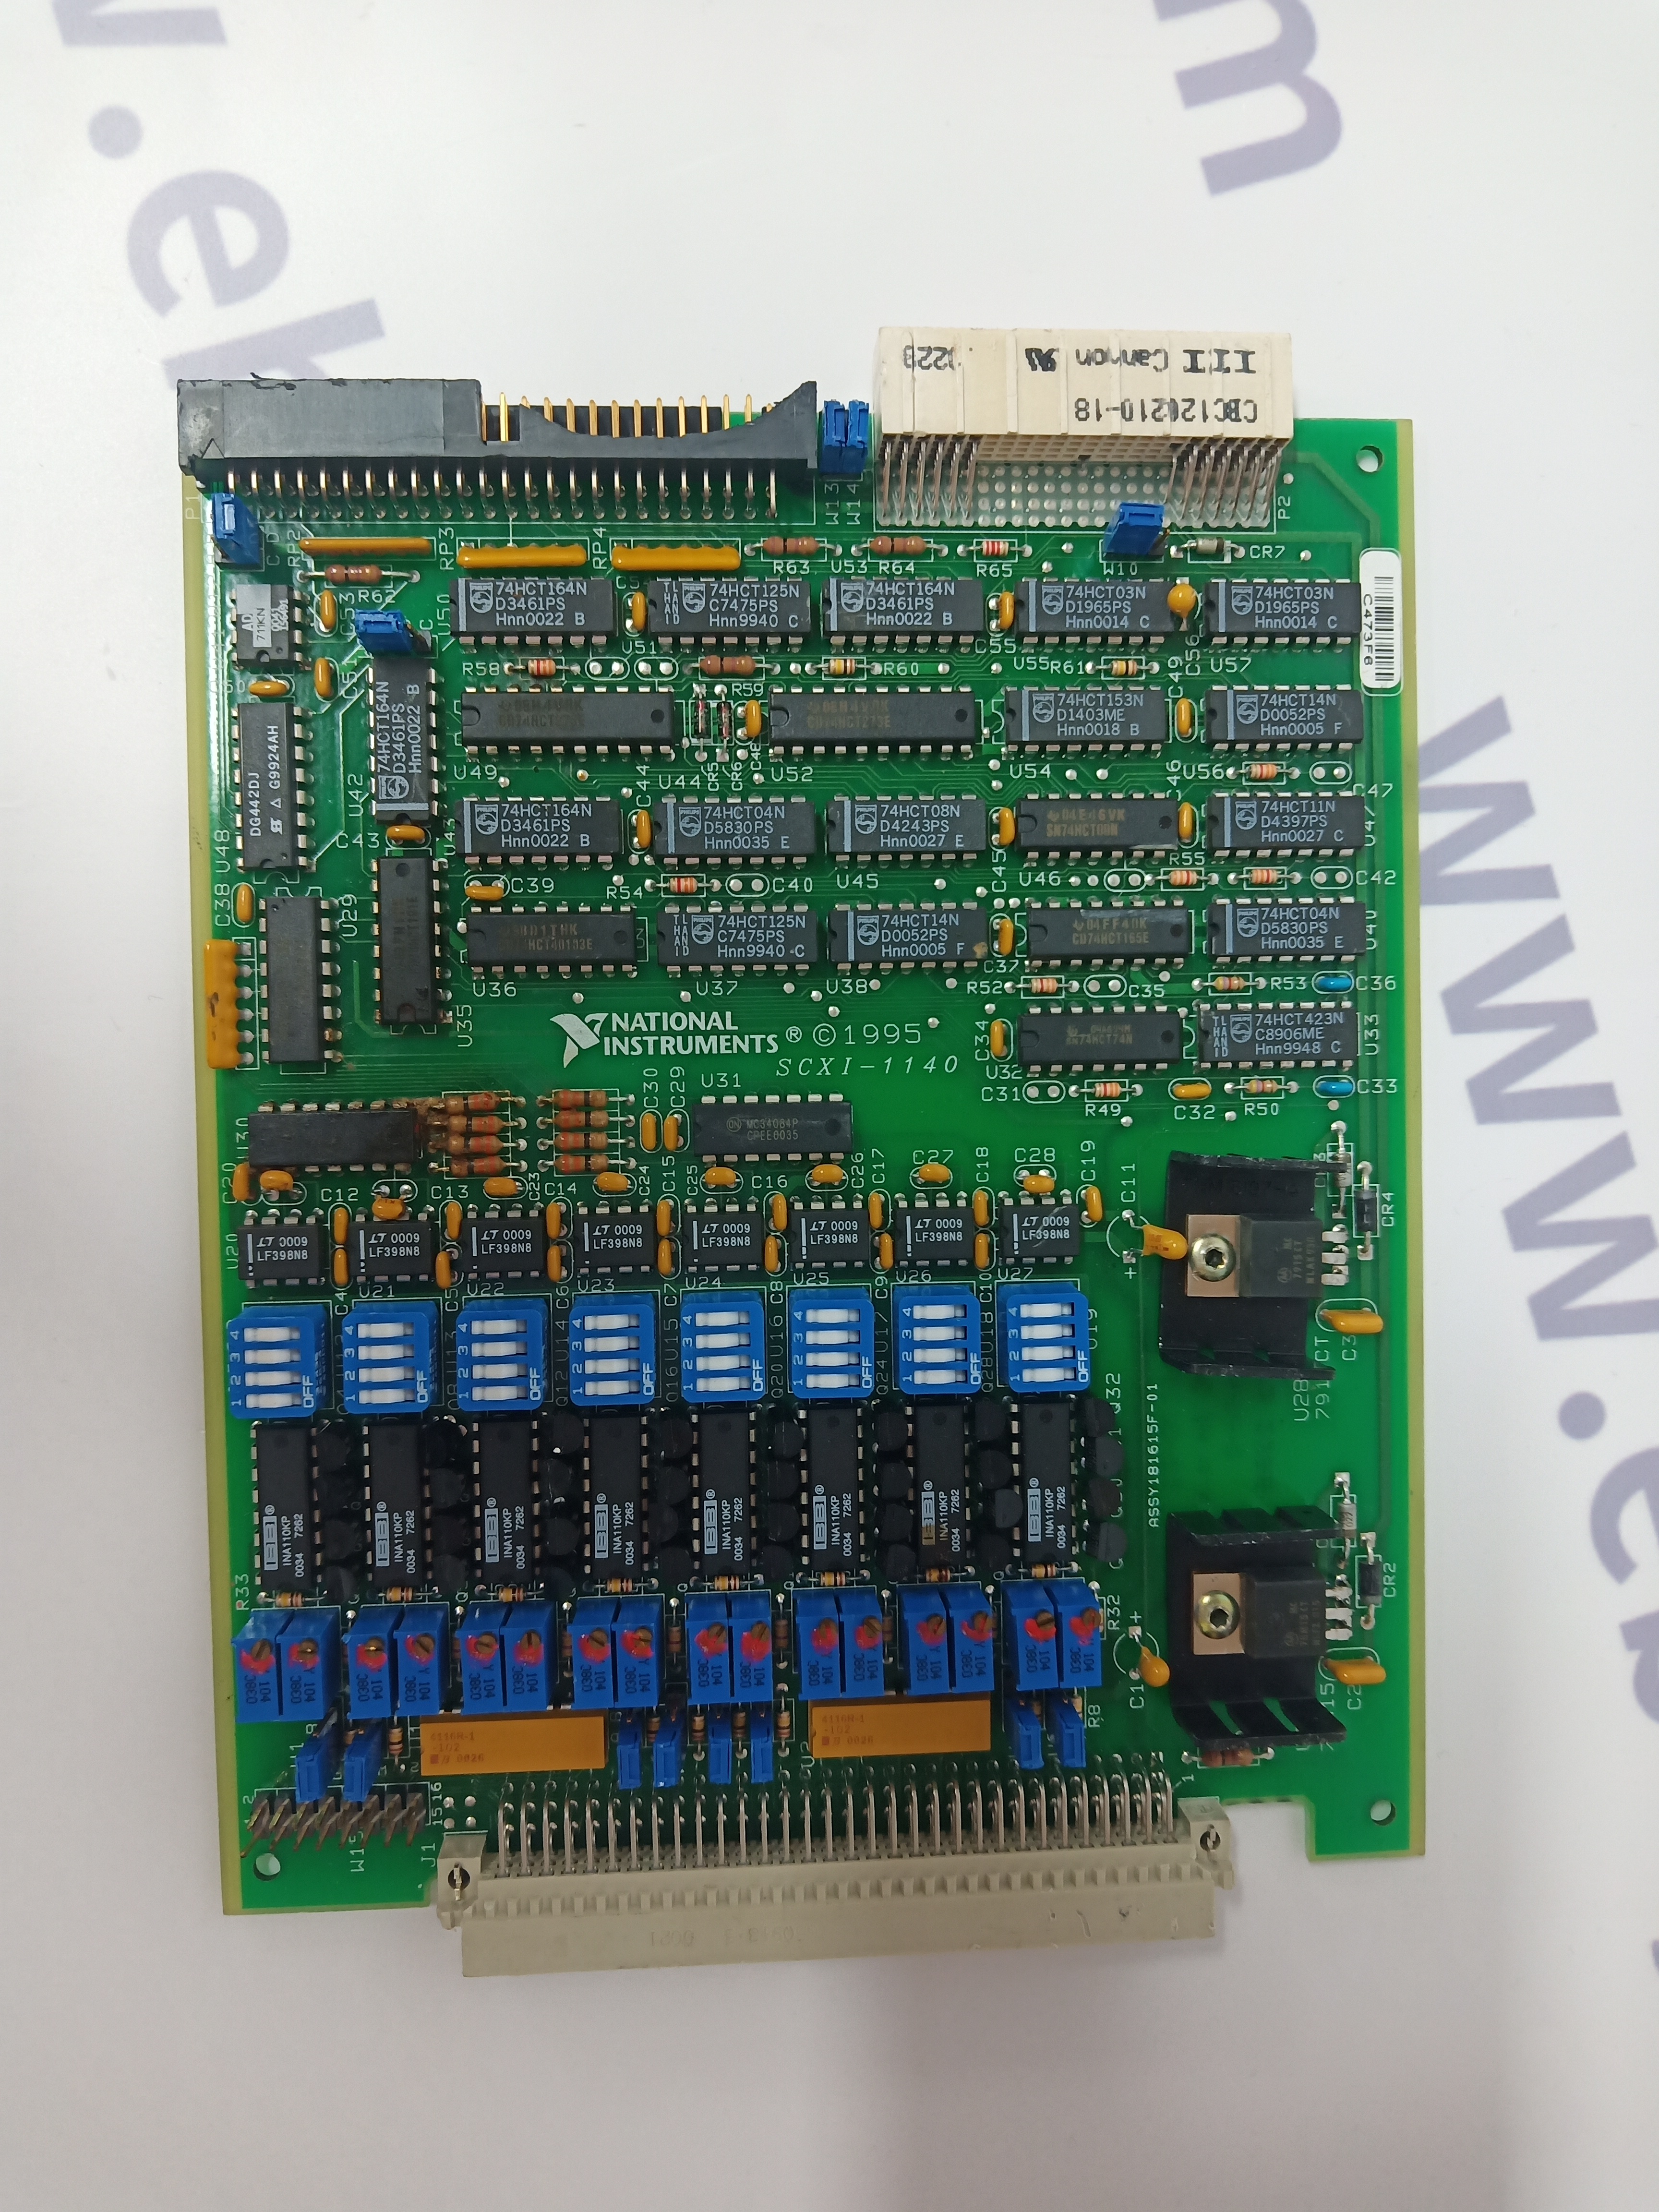 WOODWARD 9907-167 automation control system modules in stock